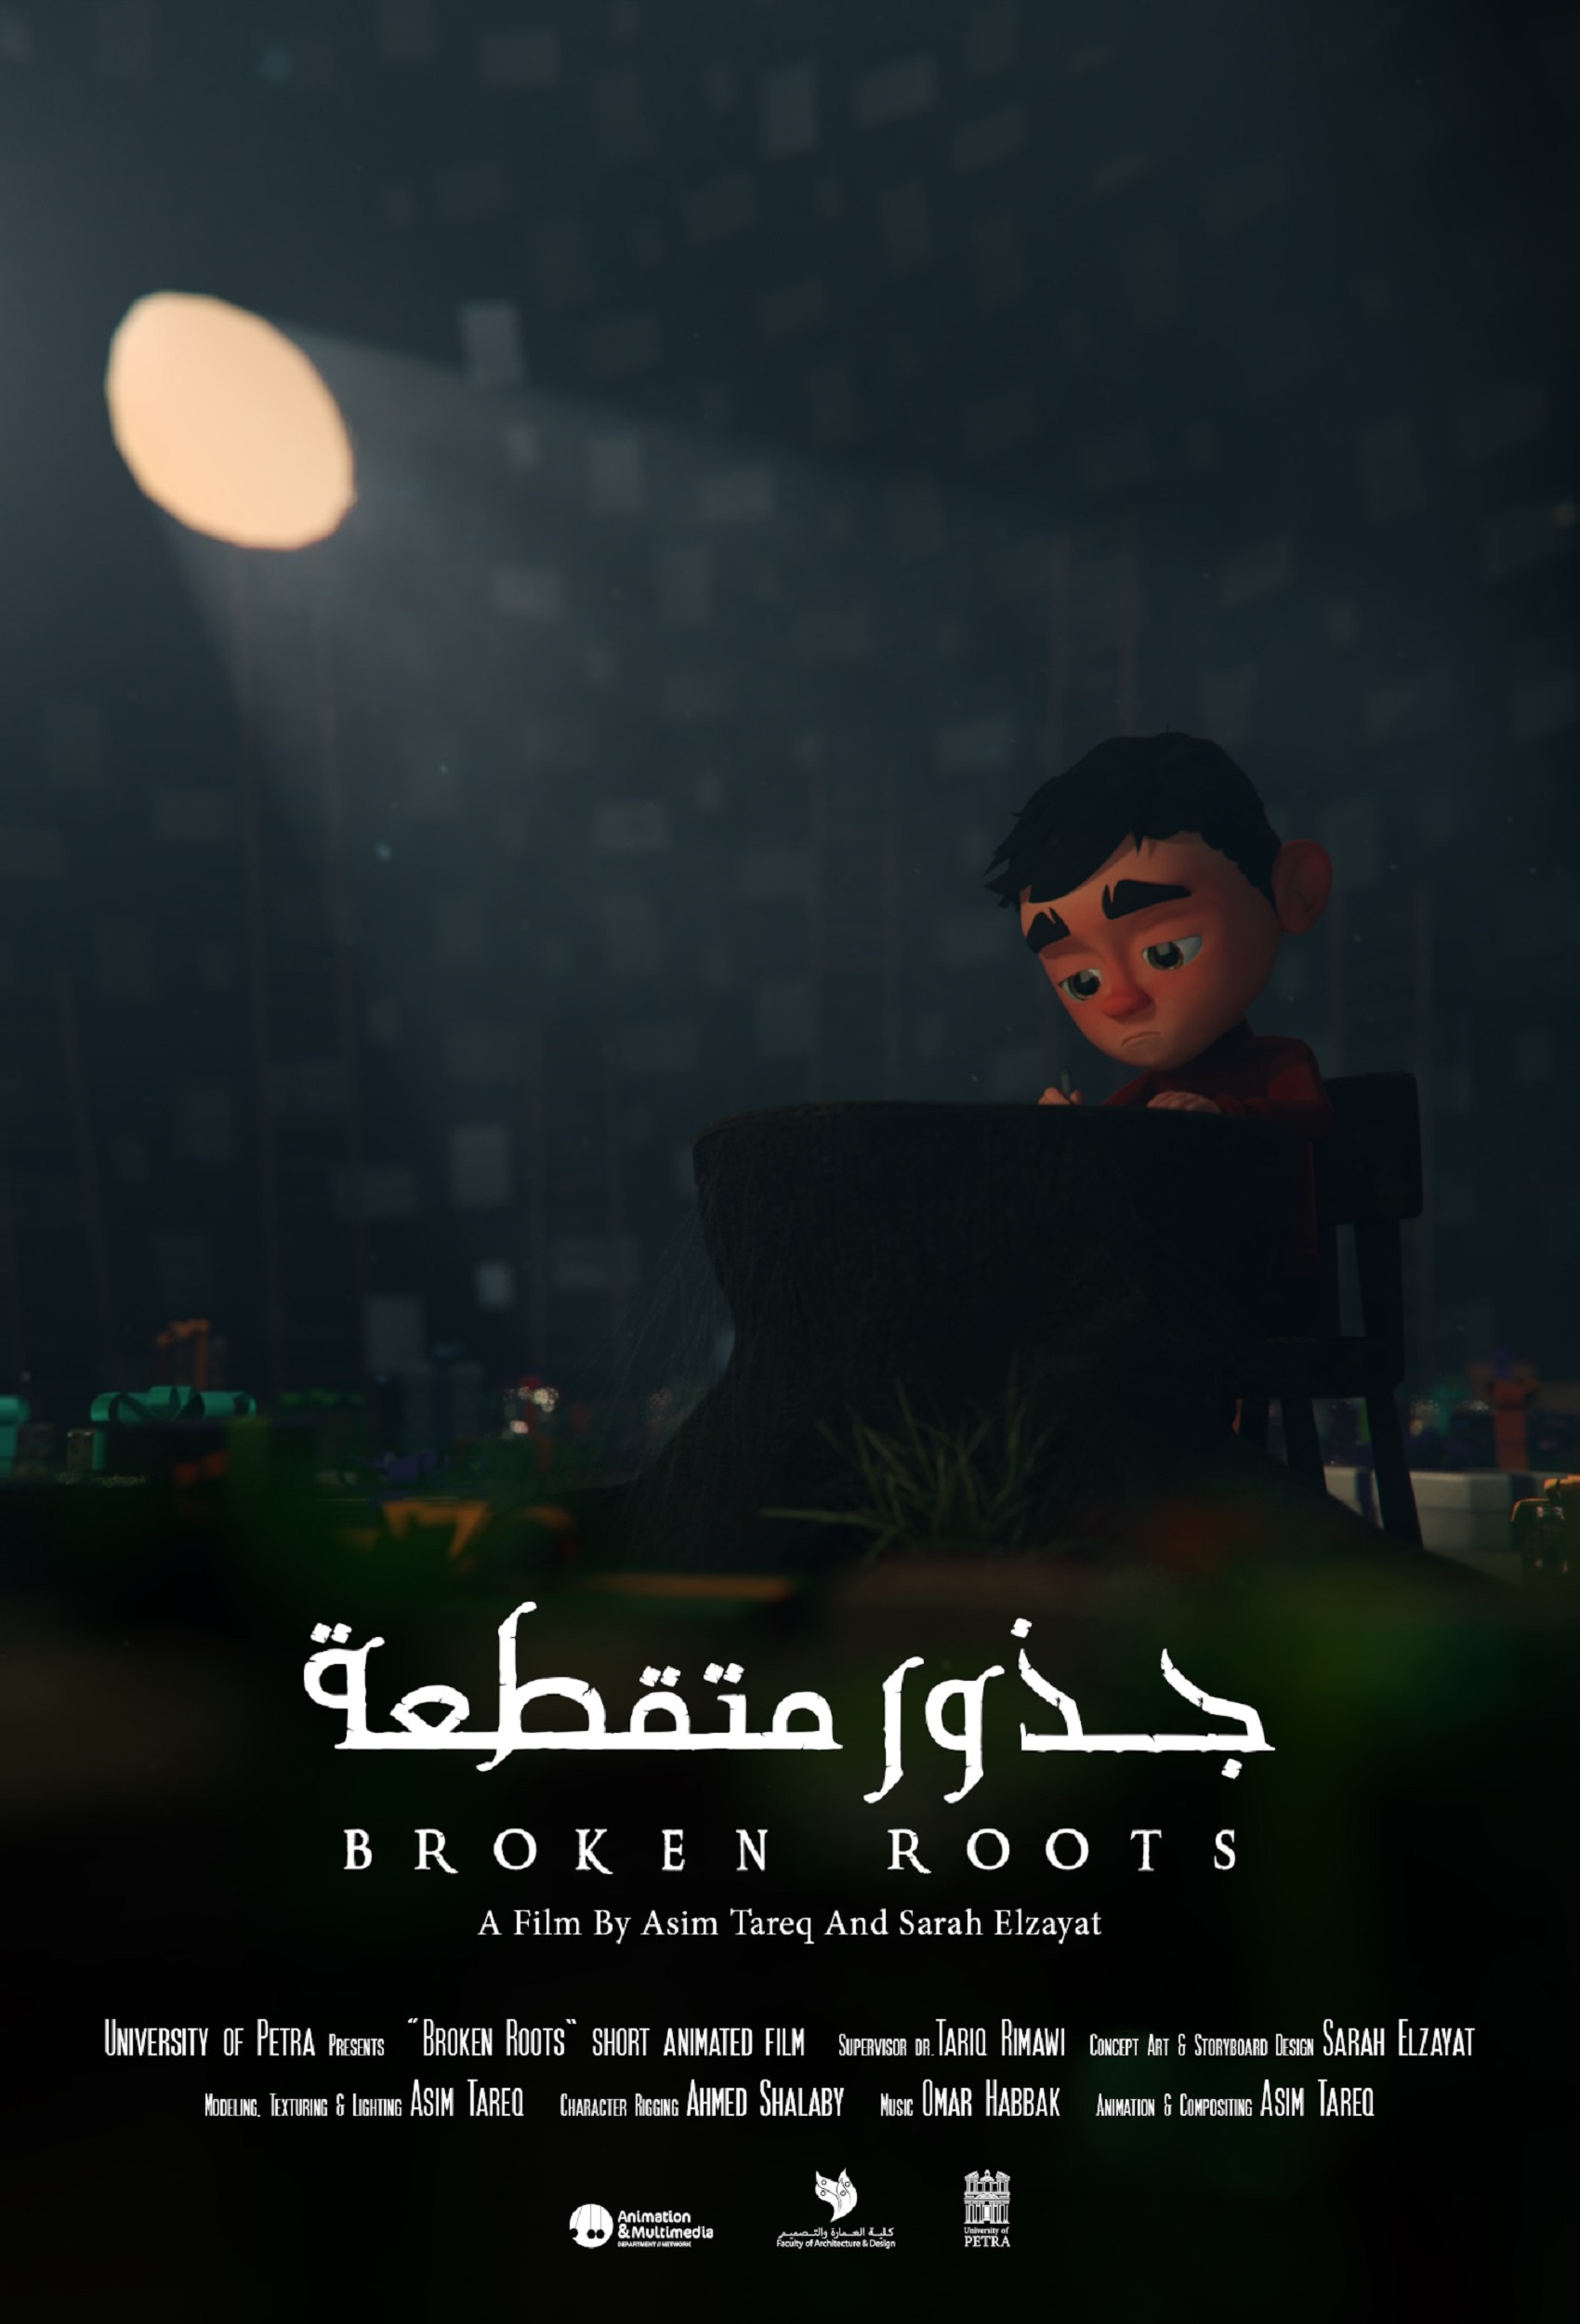 You are currently viewing Broken roots